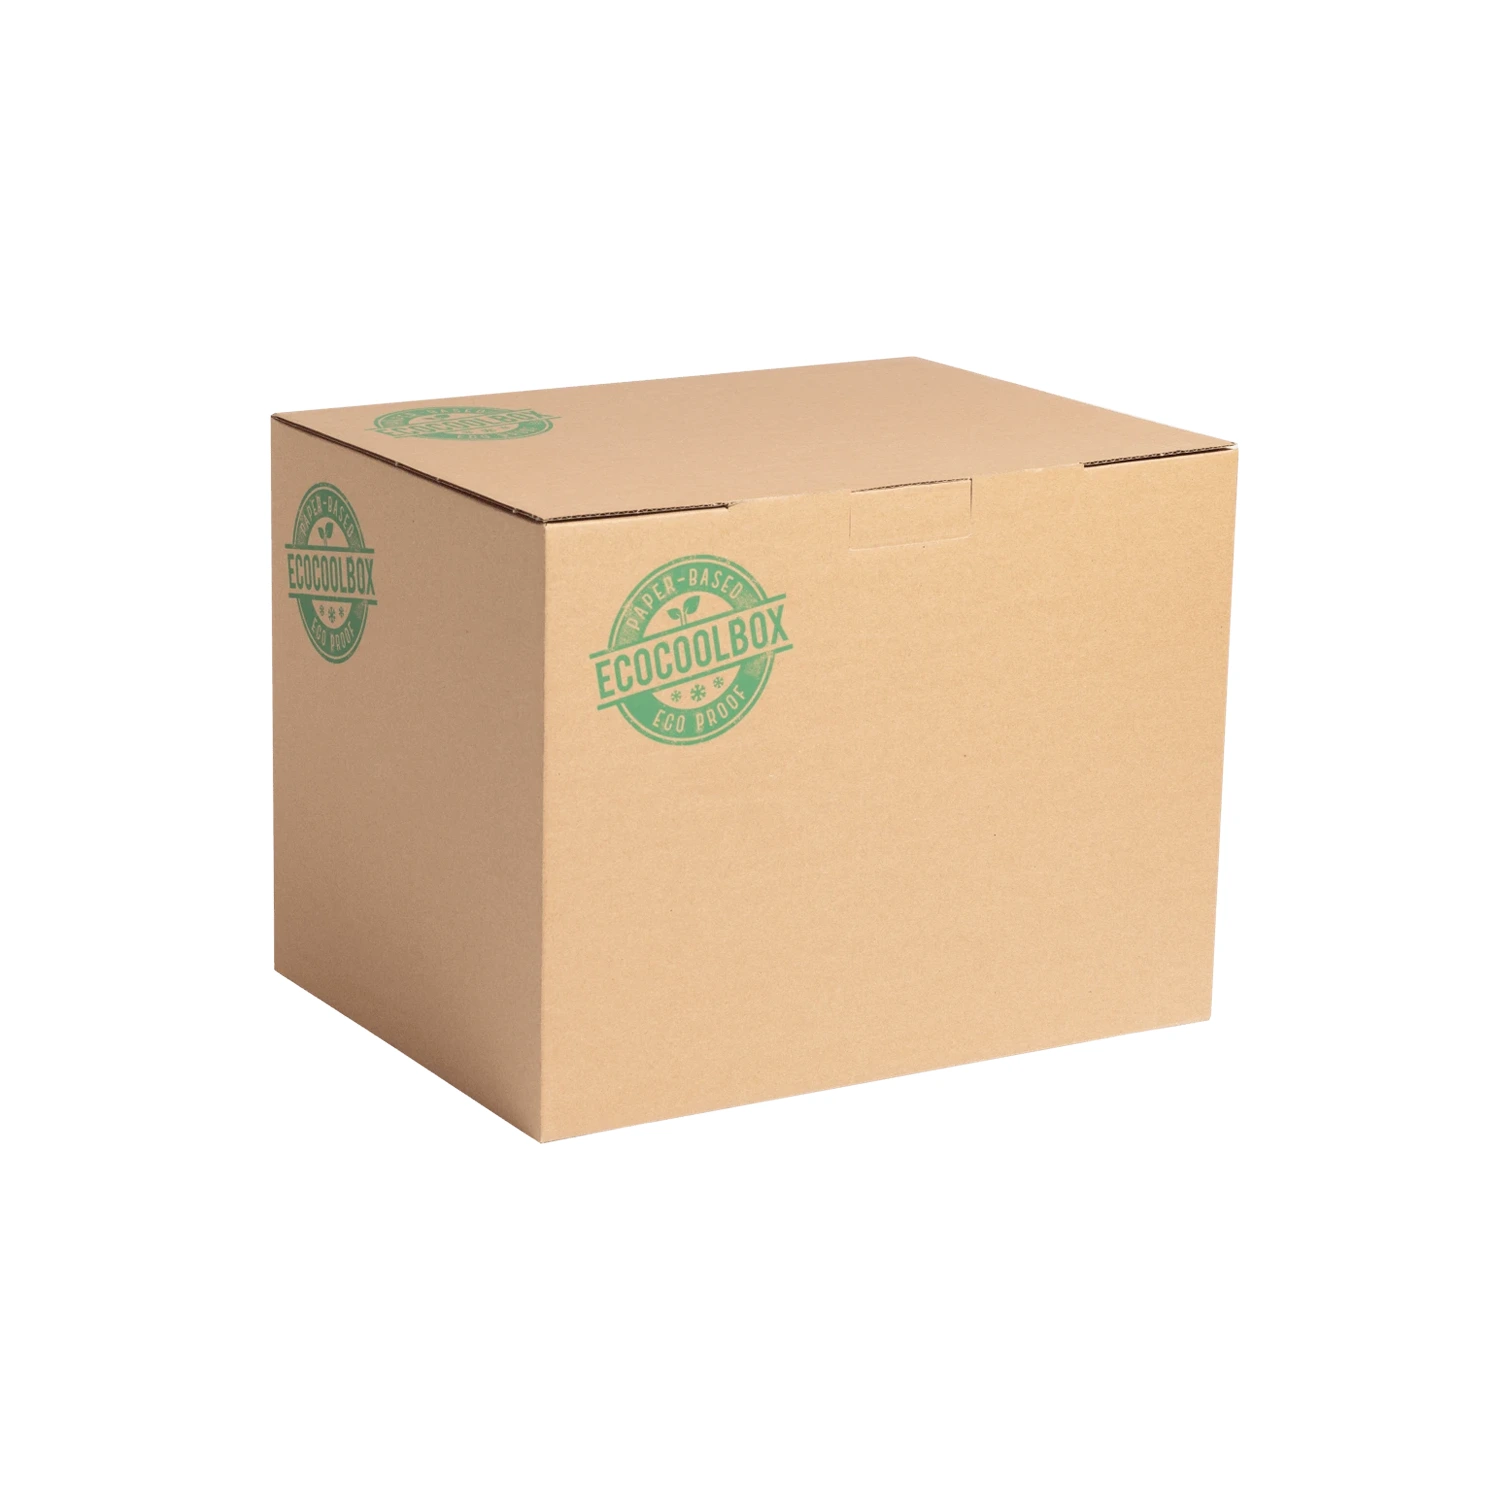 ecocoolbox-product